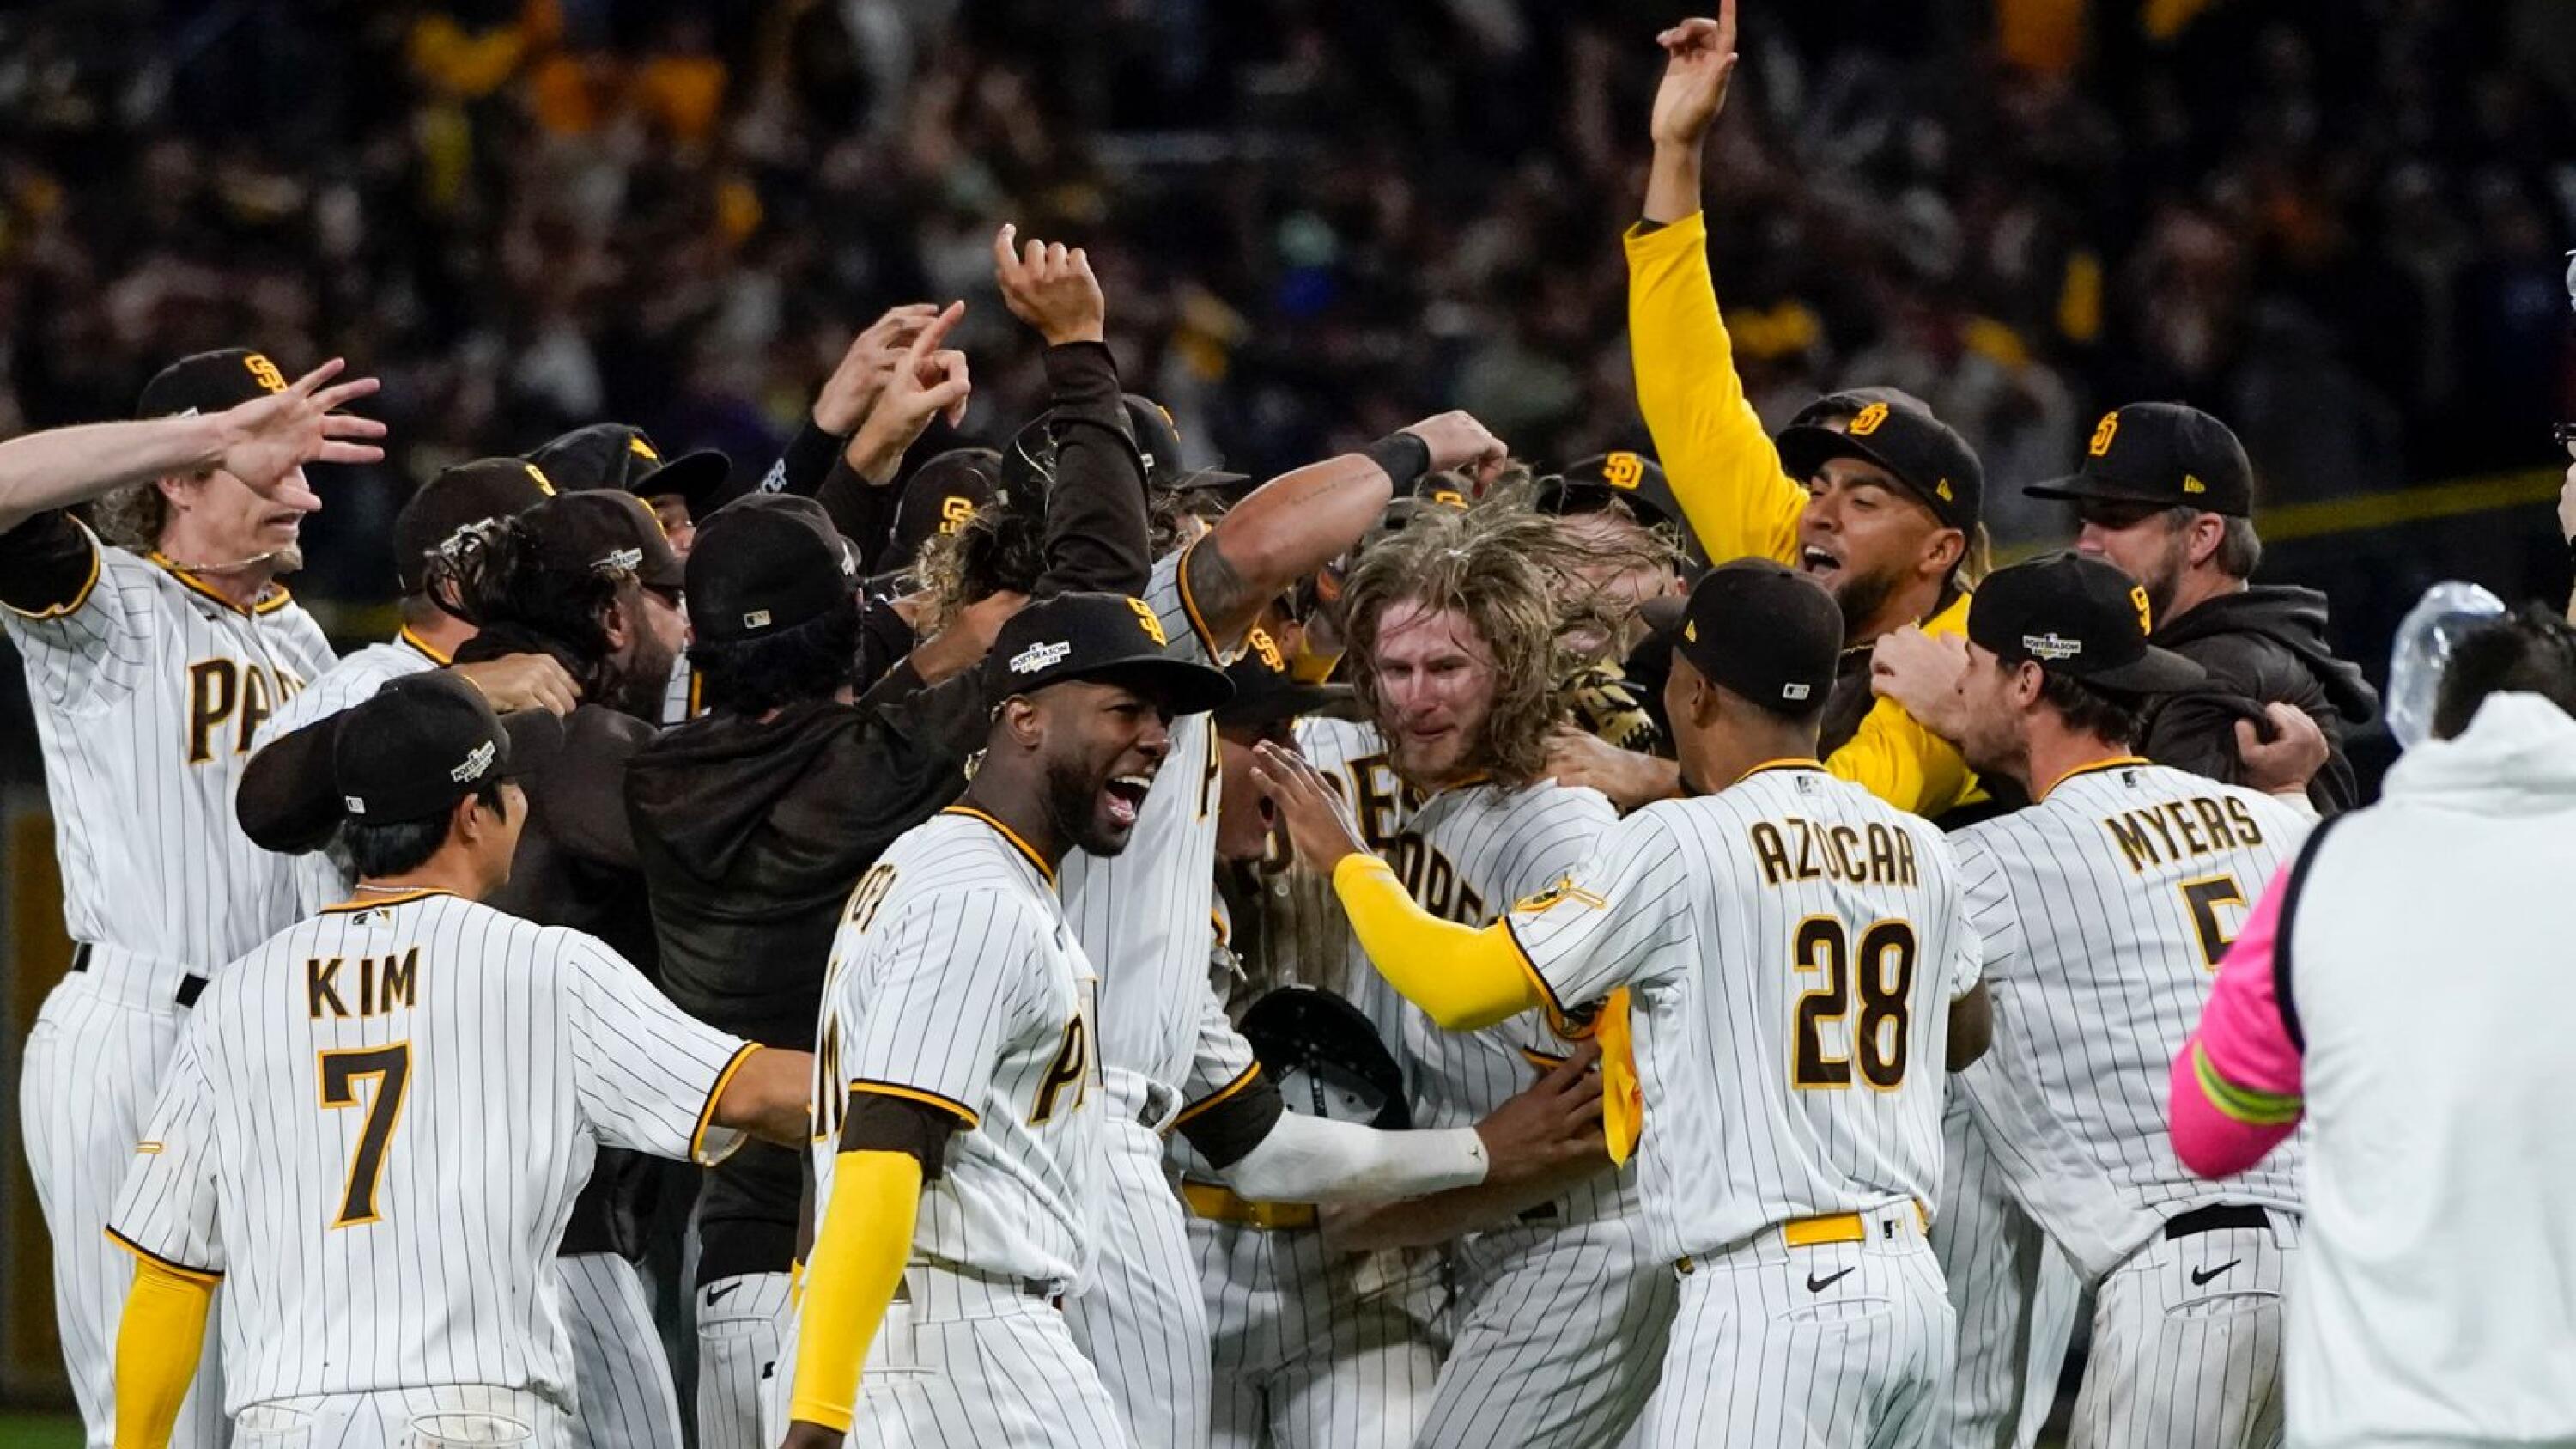 NLCS-bound Padres find their identity, eliminate Dodgers